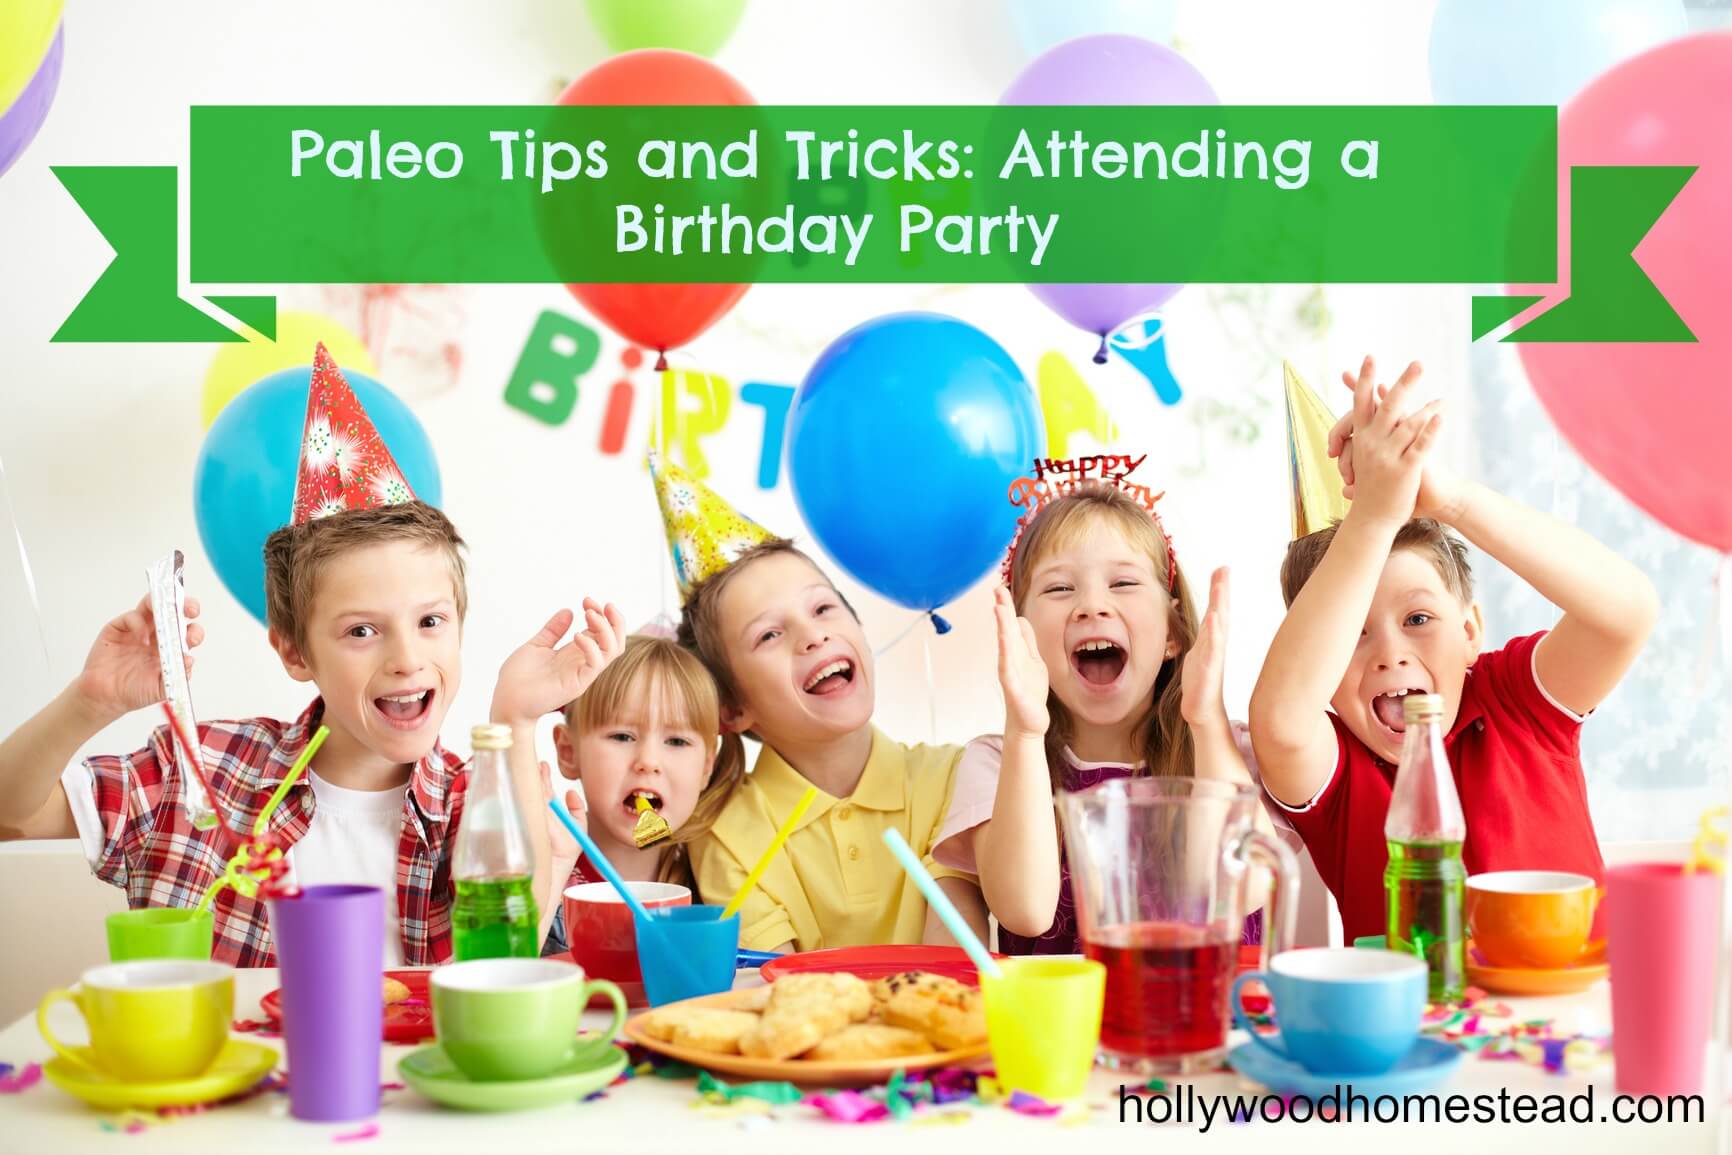 Paleo Tips and Tricks: Attending a Birthday Party